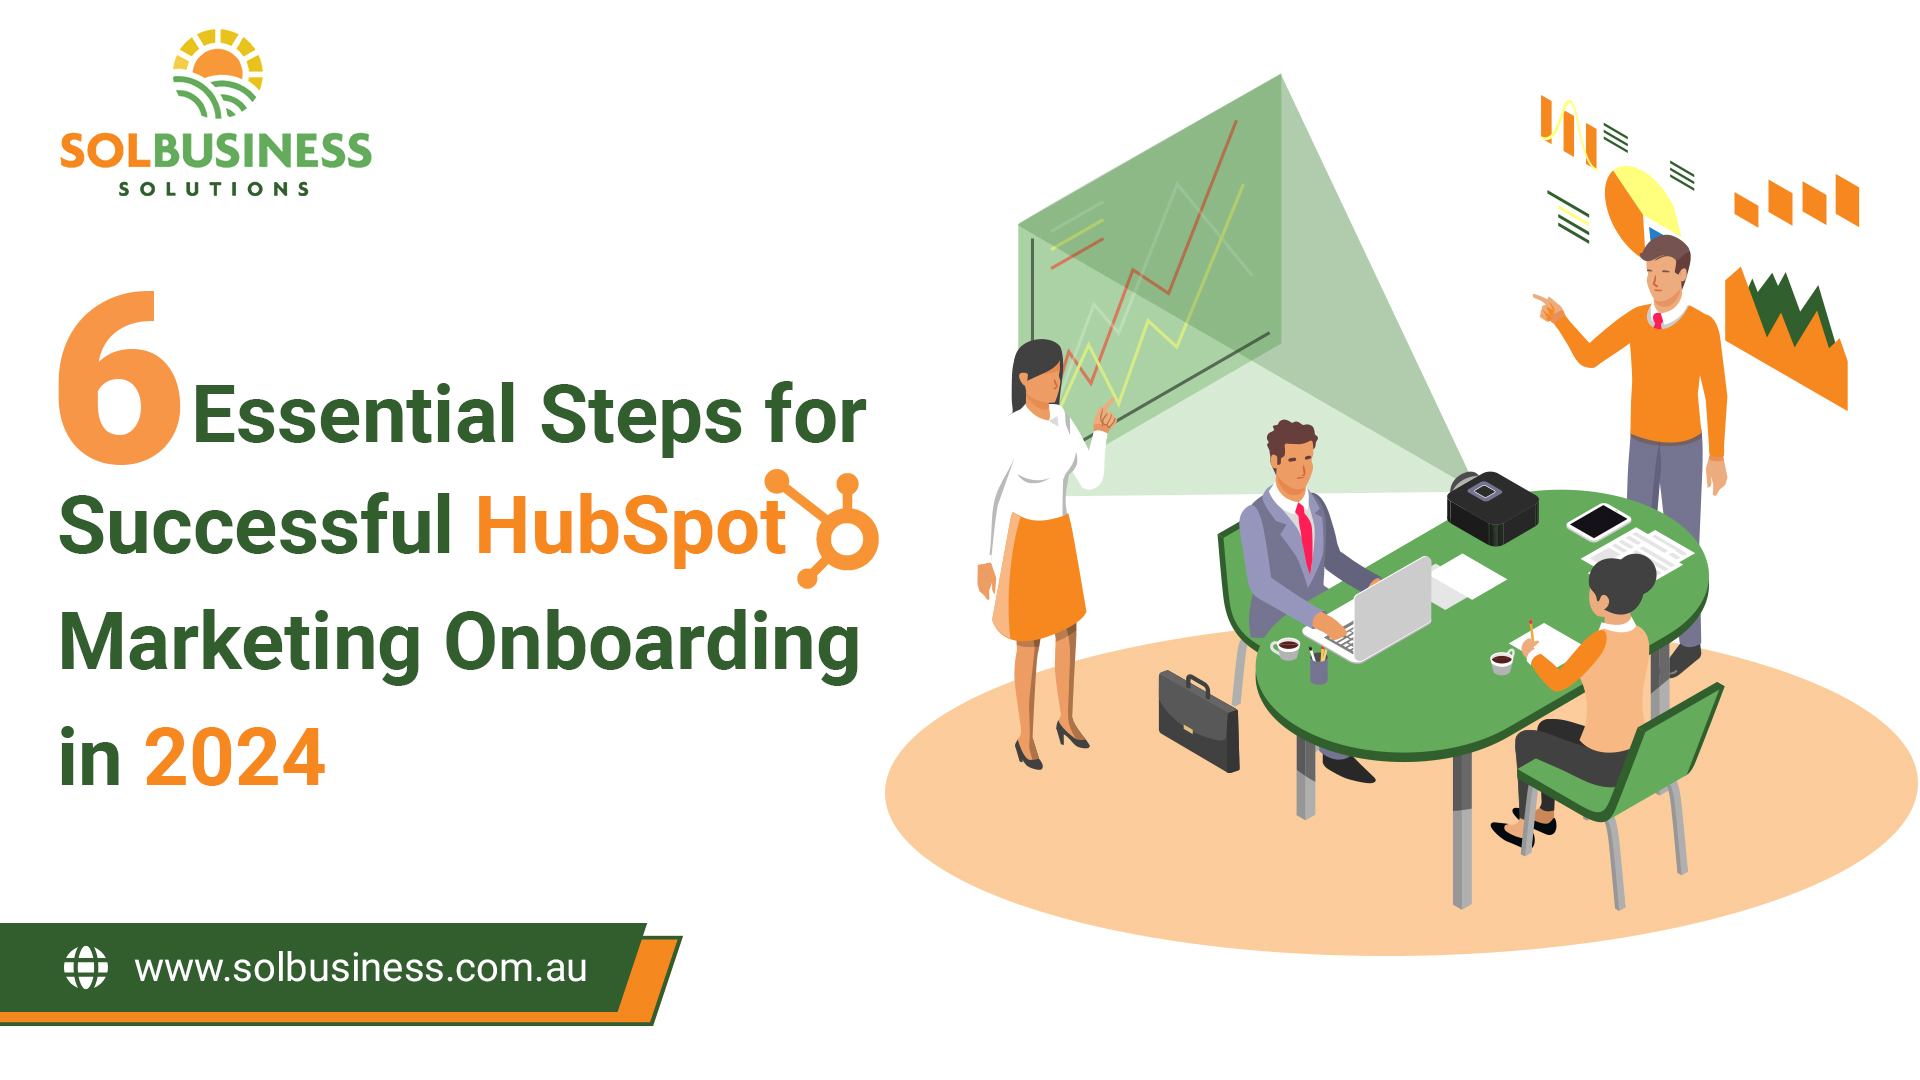 Six Essential Steps for Successful HubSpot Marketing Onboarding 2024